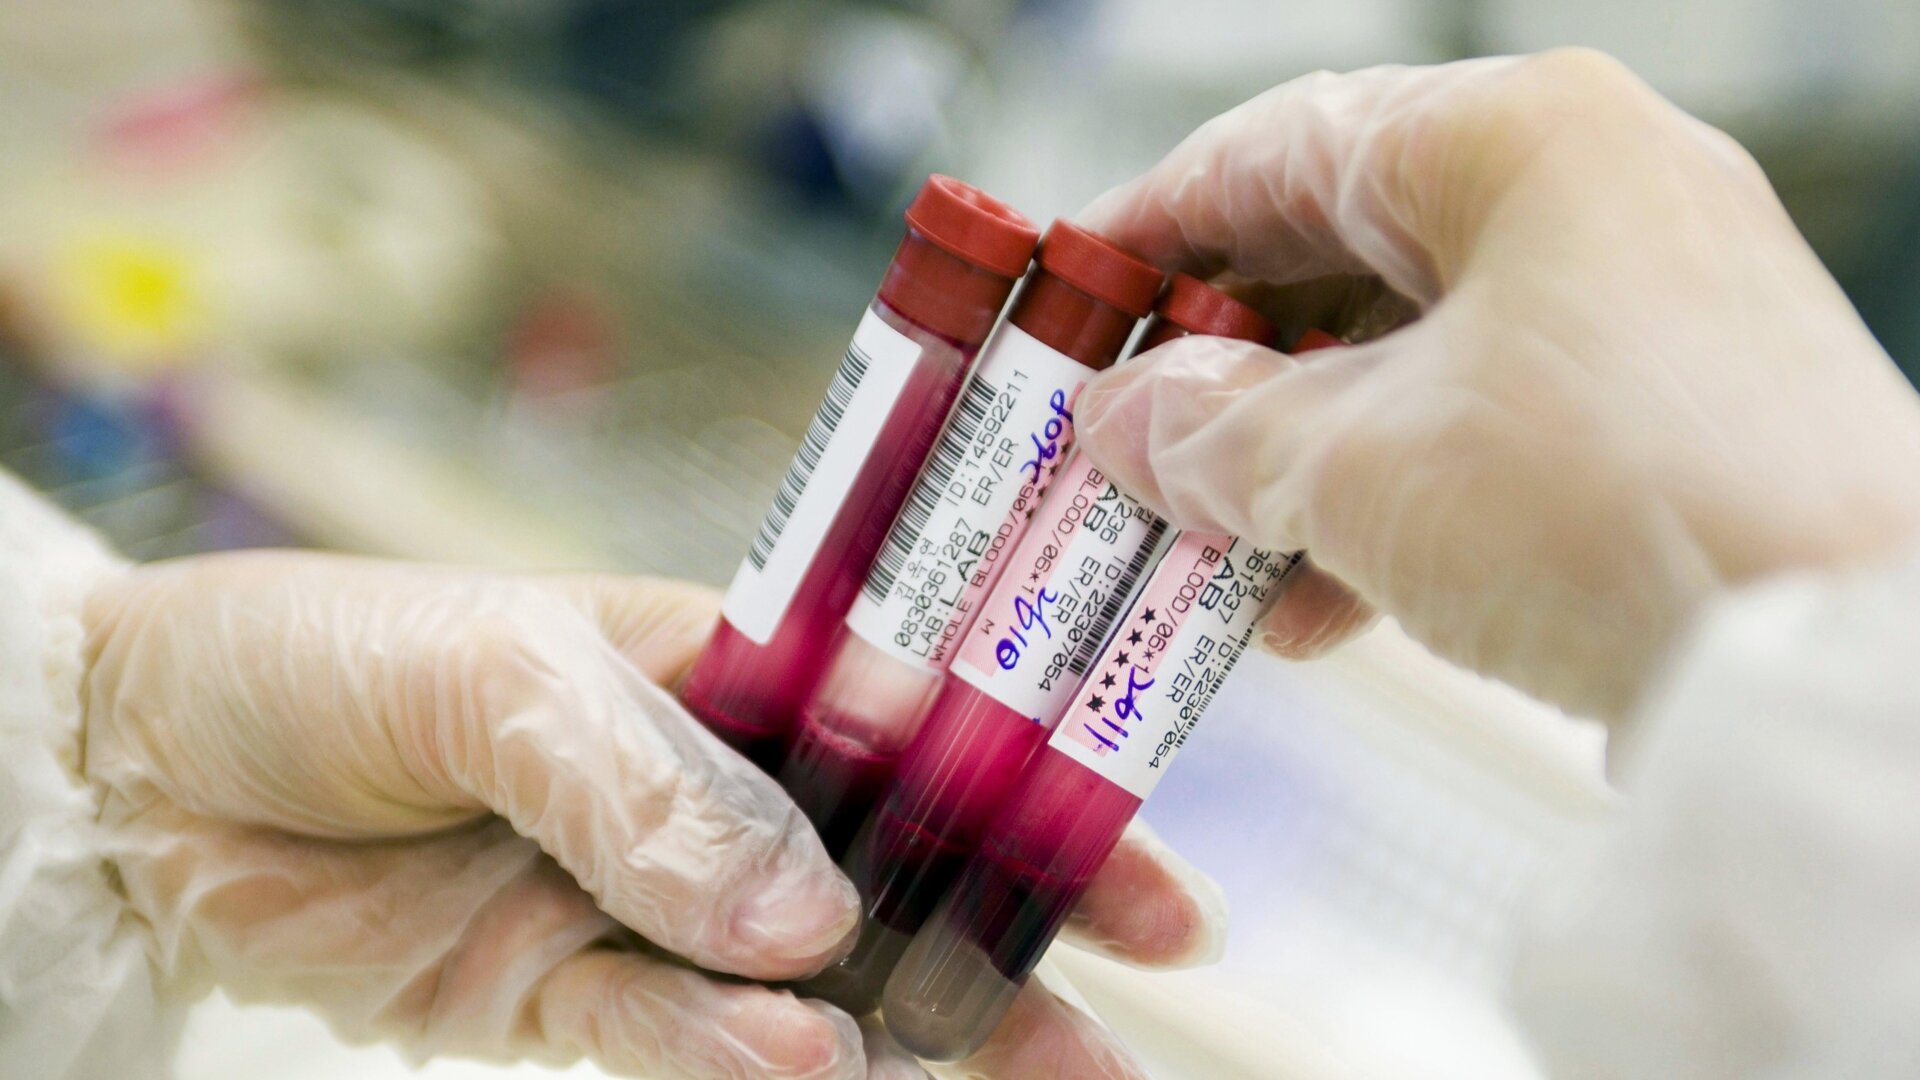 Blood Test Shows Promise for Alzheimer’s Diagnosis